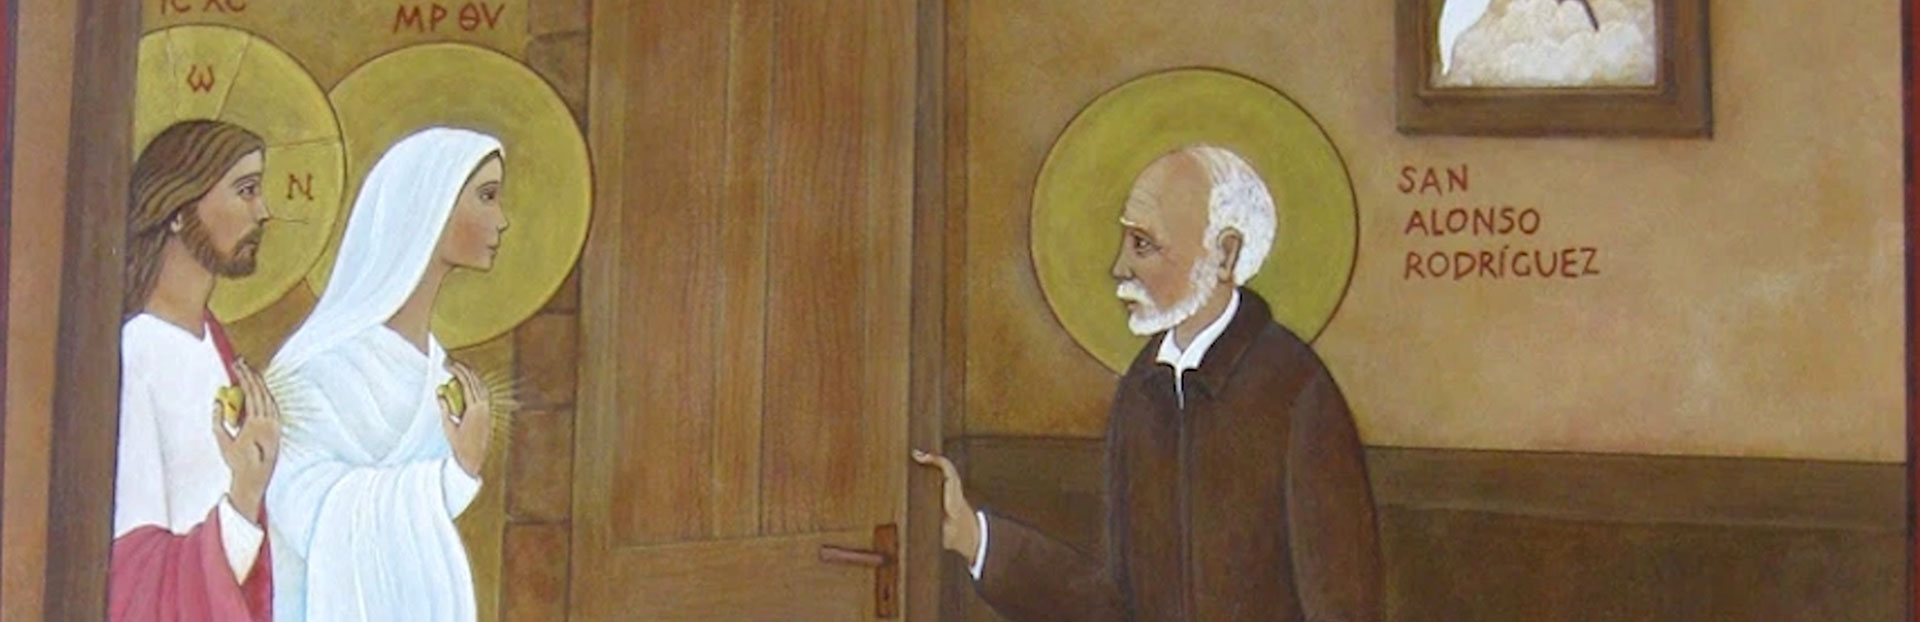 Homily for the Feast of St. Alphonsus, the porter